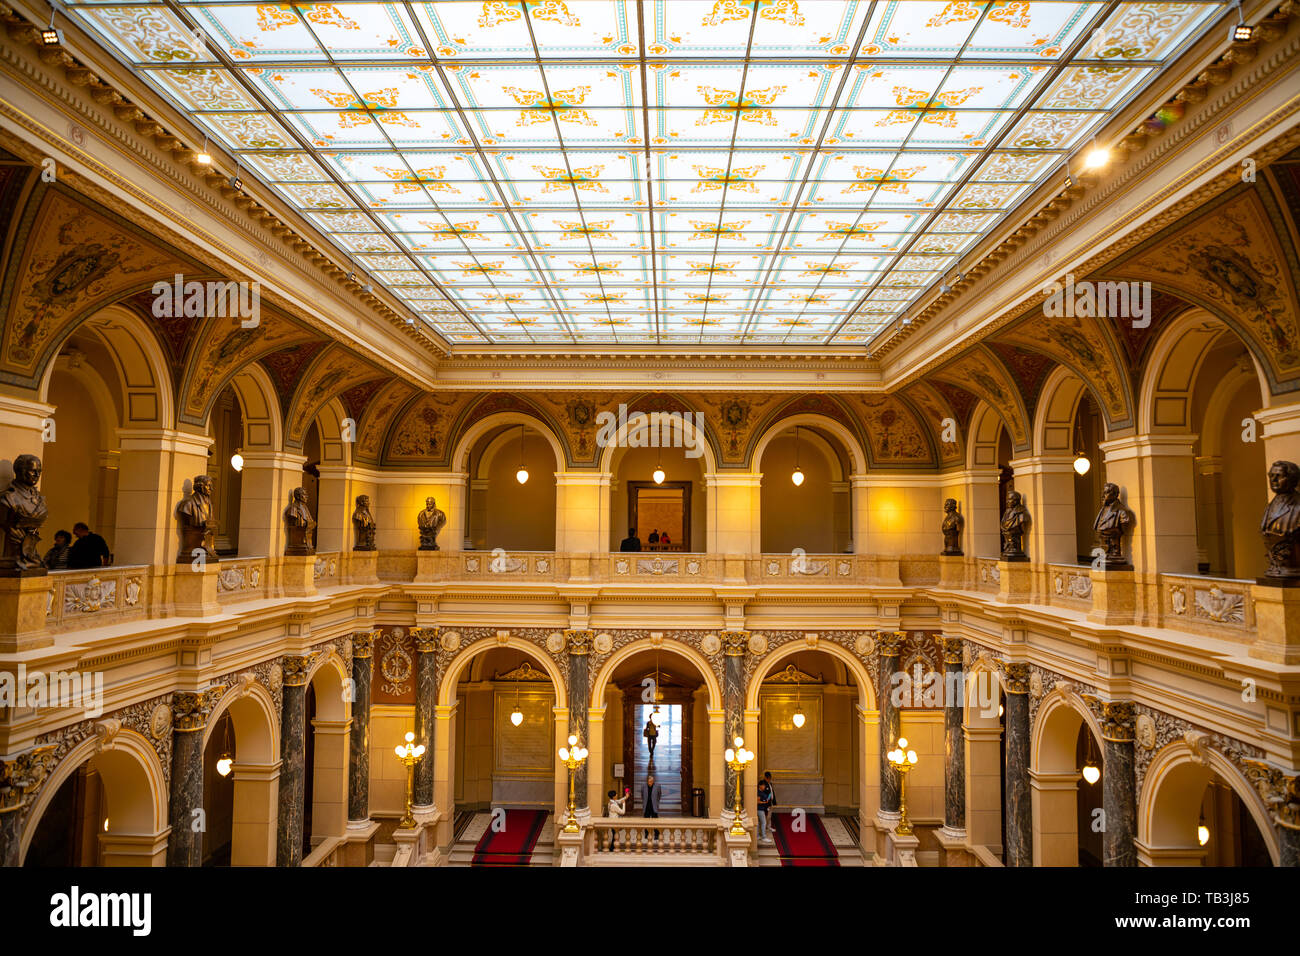 Prague, Czech Republic - 6.05.2019: Interier of National Museum in  neo-renaissance style, recently renovated in 2018, located on Wenceslas  Square in P Stock Photo - Alamy